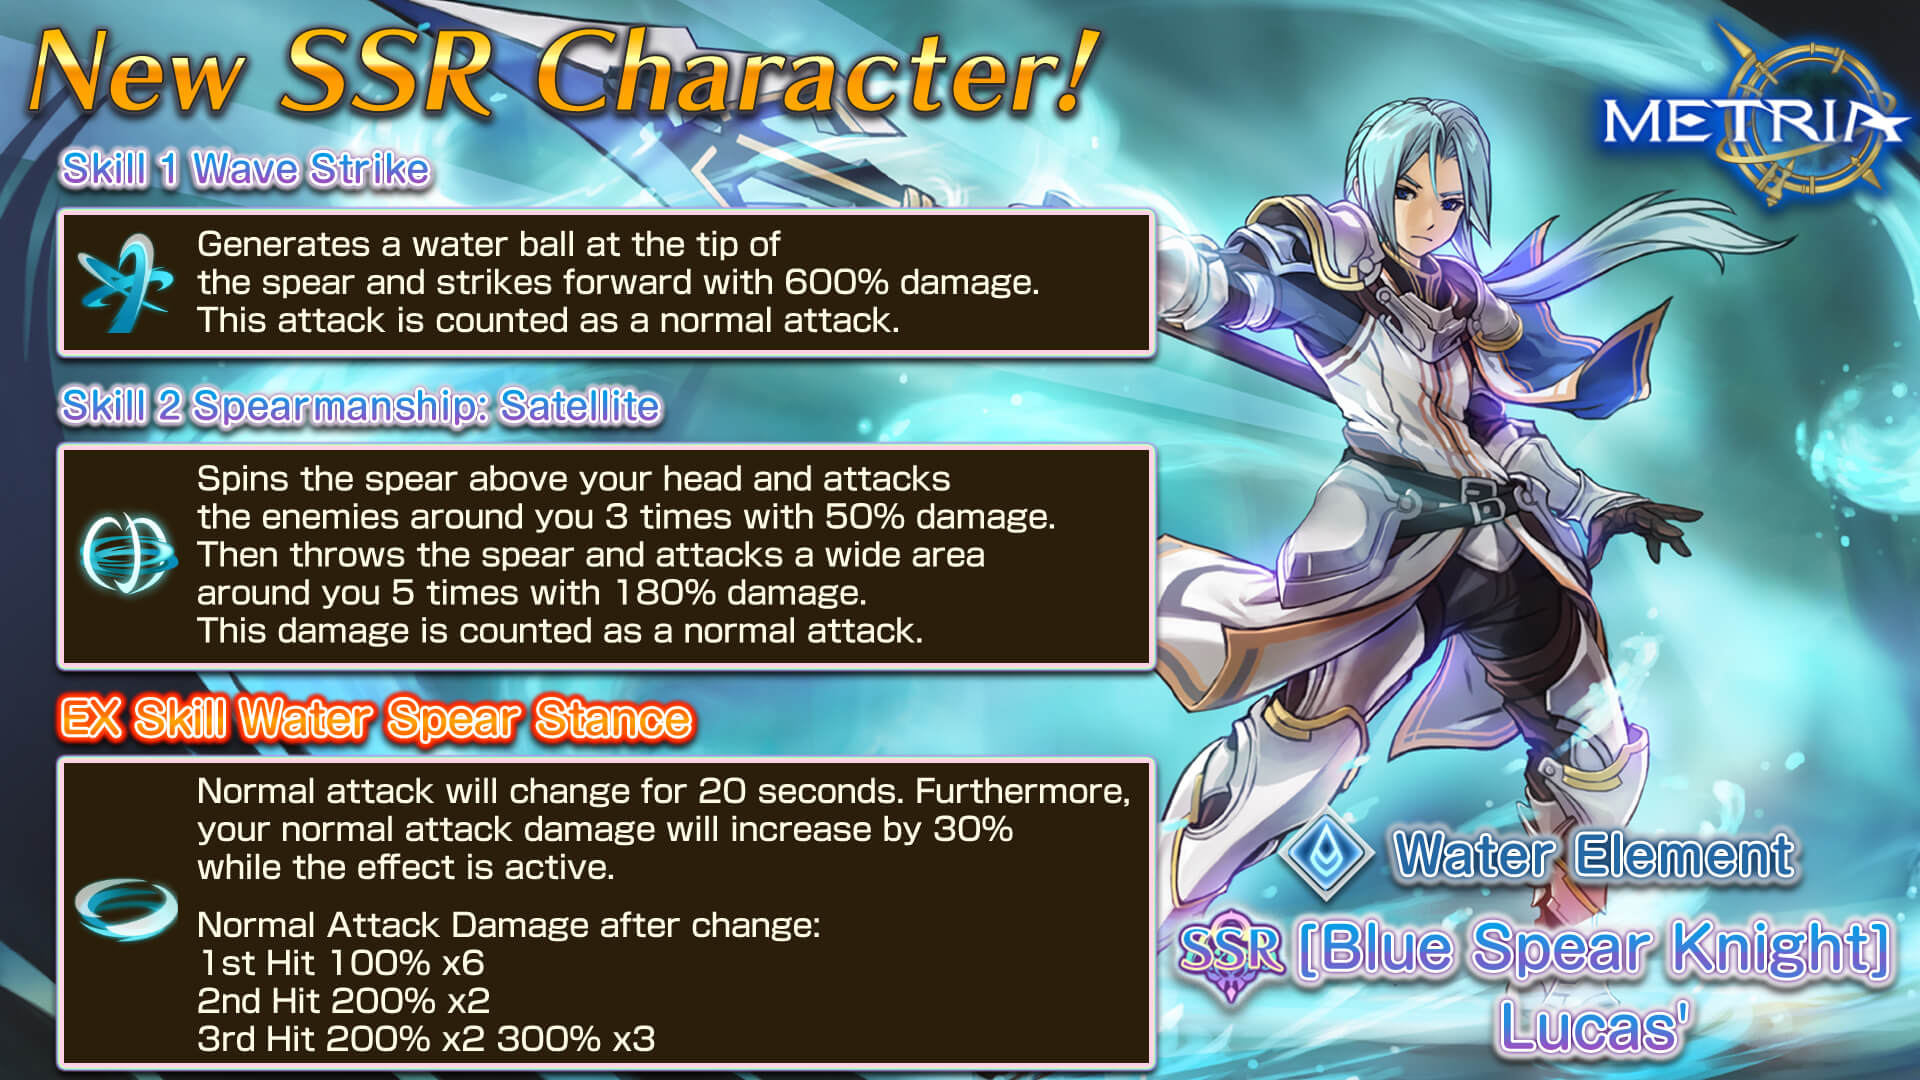 New SSR Character: "Blue Spear Knight, Lucas" Available for Purchase!